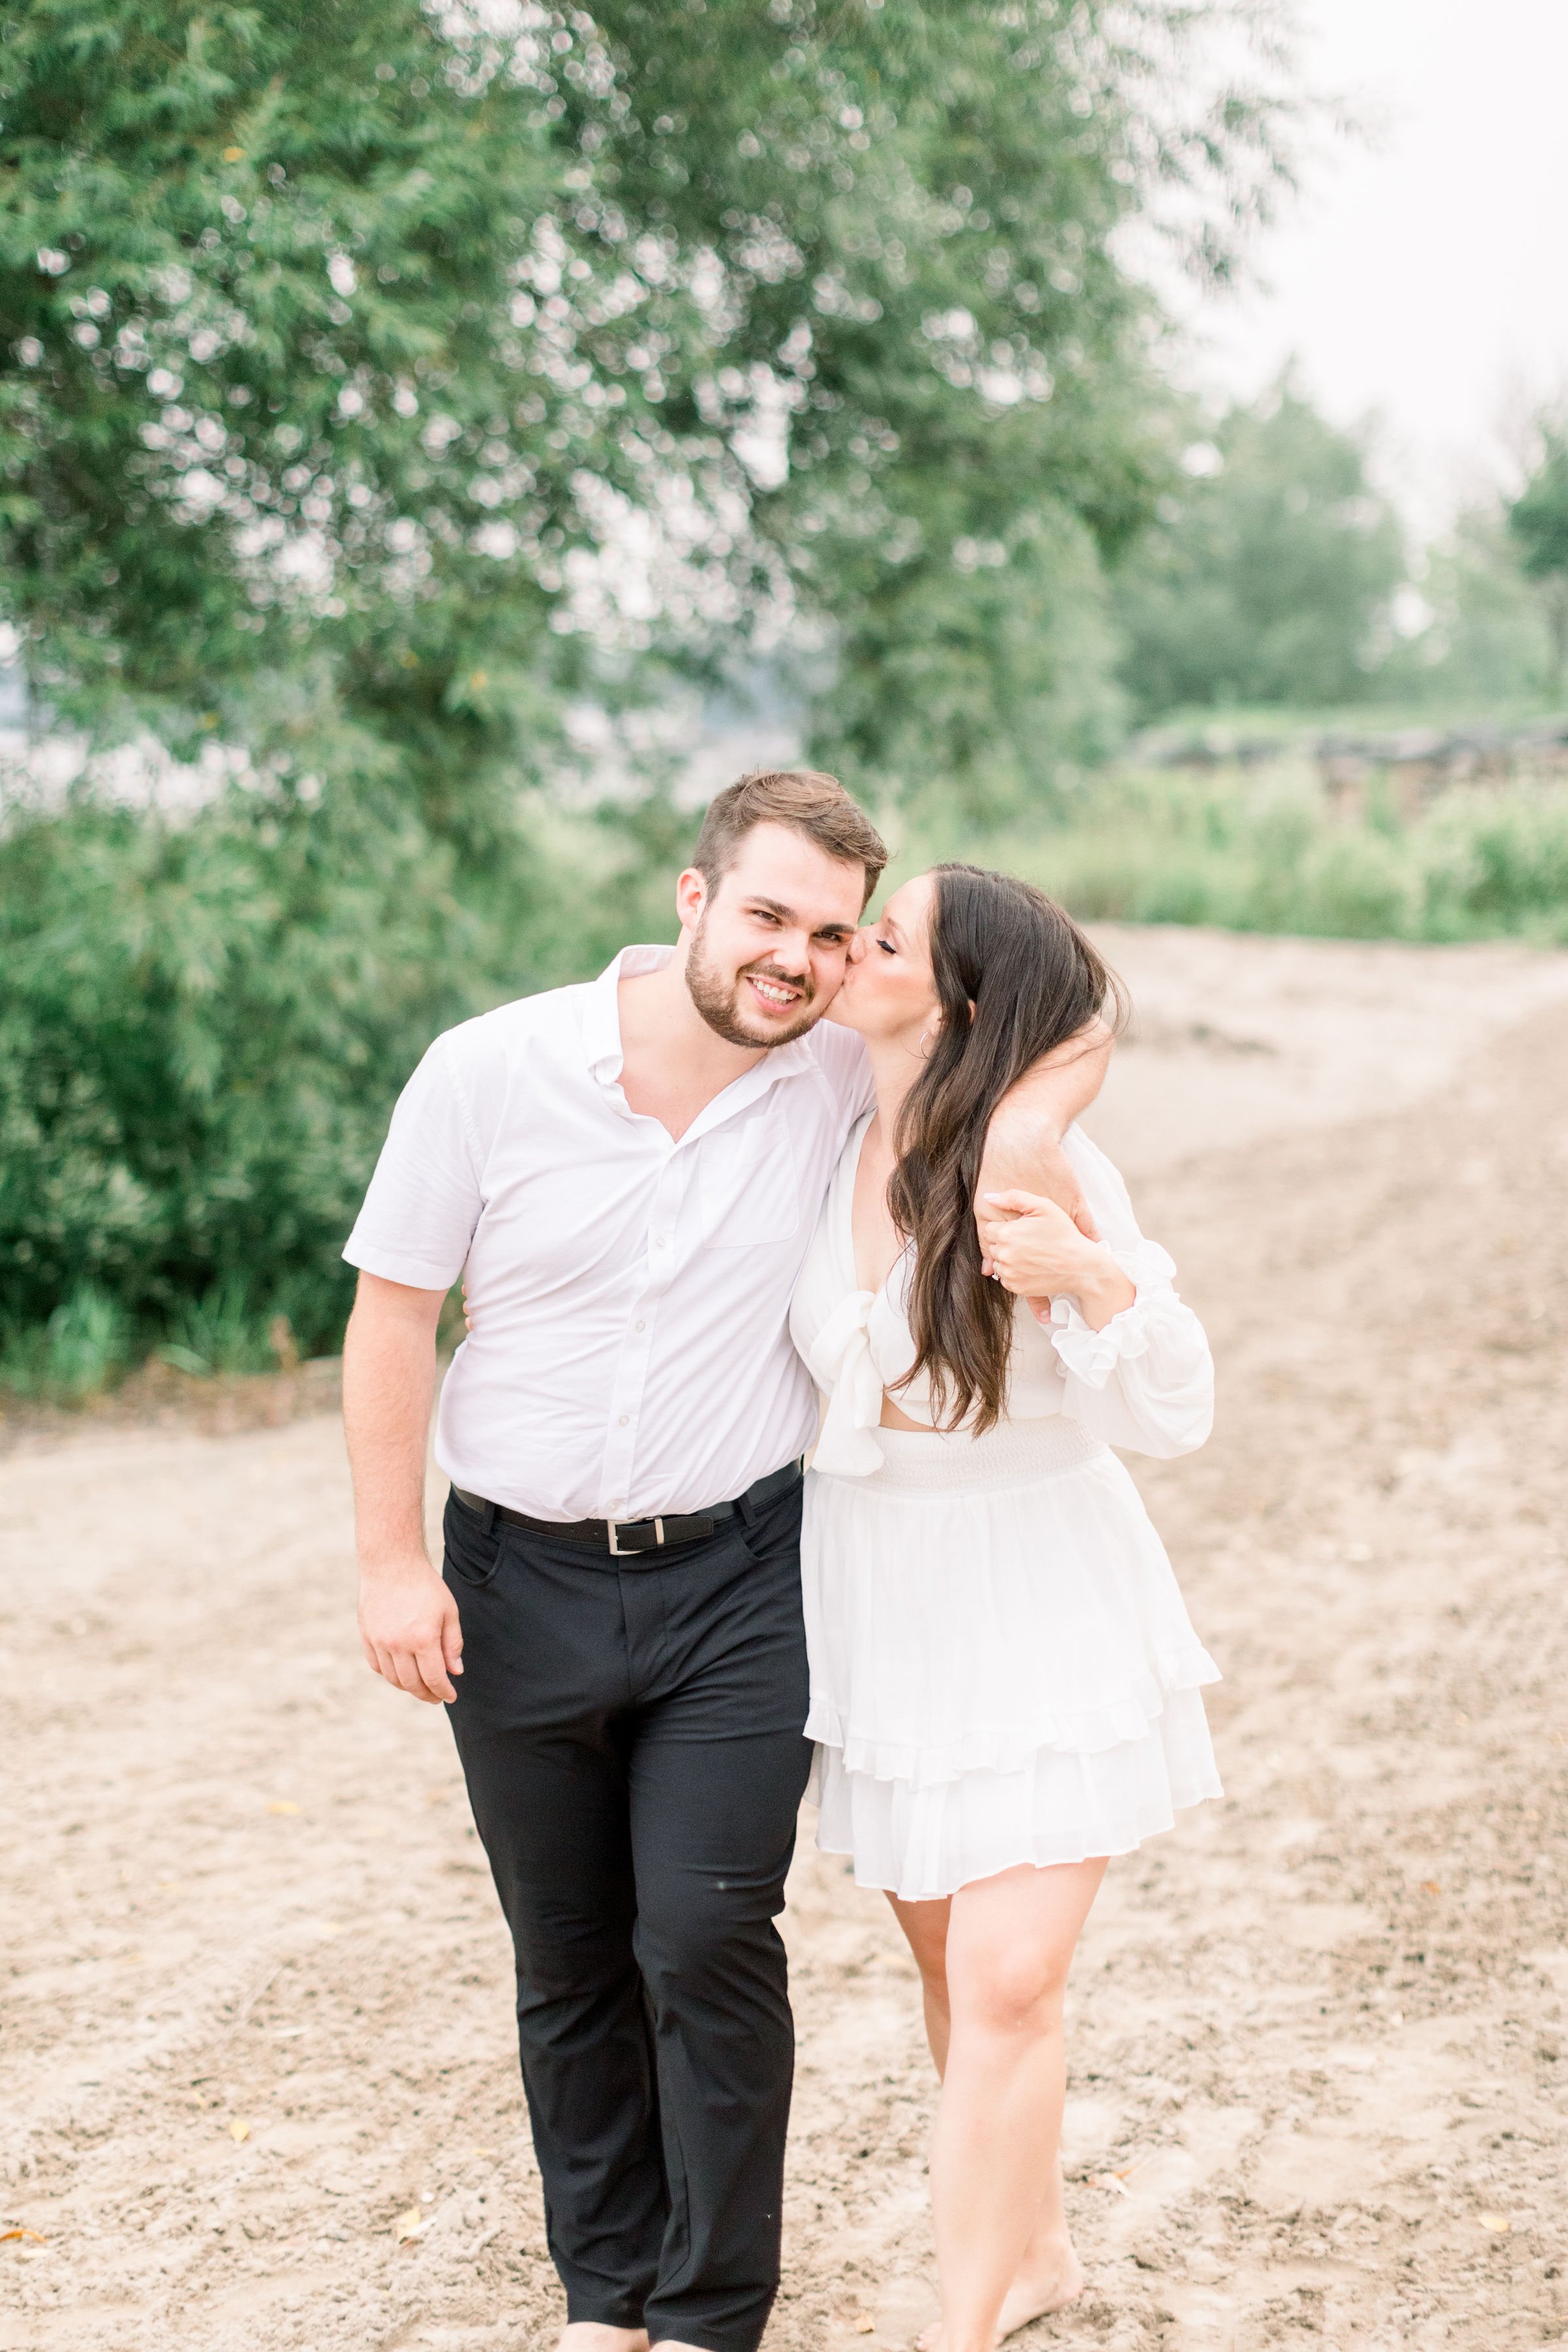  Walking with his arm around his fiance a man receives a kiss on the cheek by Chelsea Mason Photography. woman kiss man #Kingstonengagement #GrassCreekParkPortraits #Ontarioengagementphotographers #Chelseamasonphotography #Chelseamasonengagements 